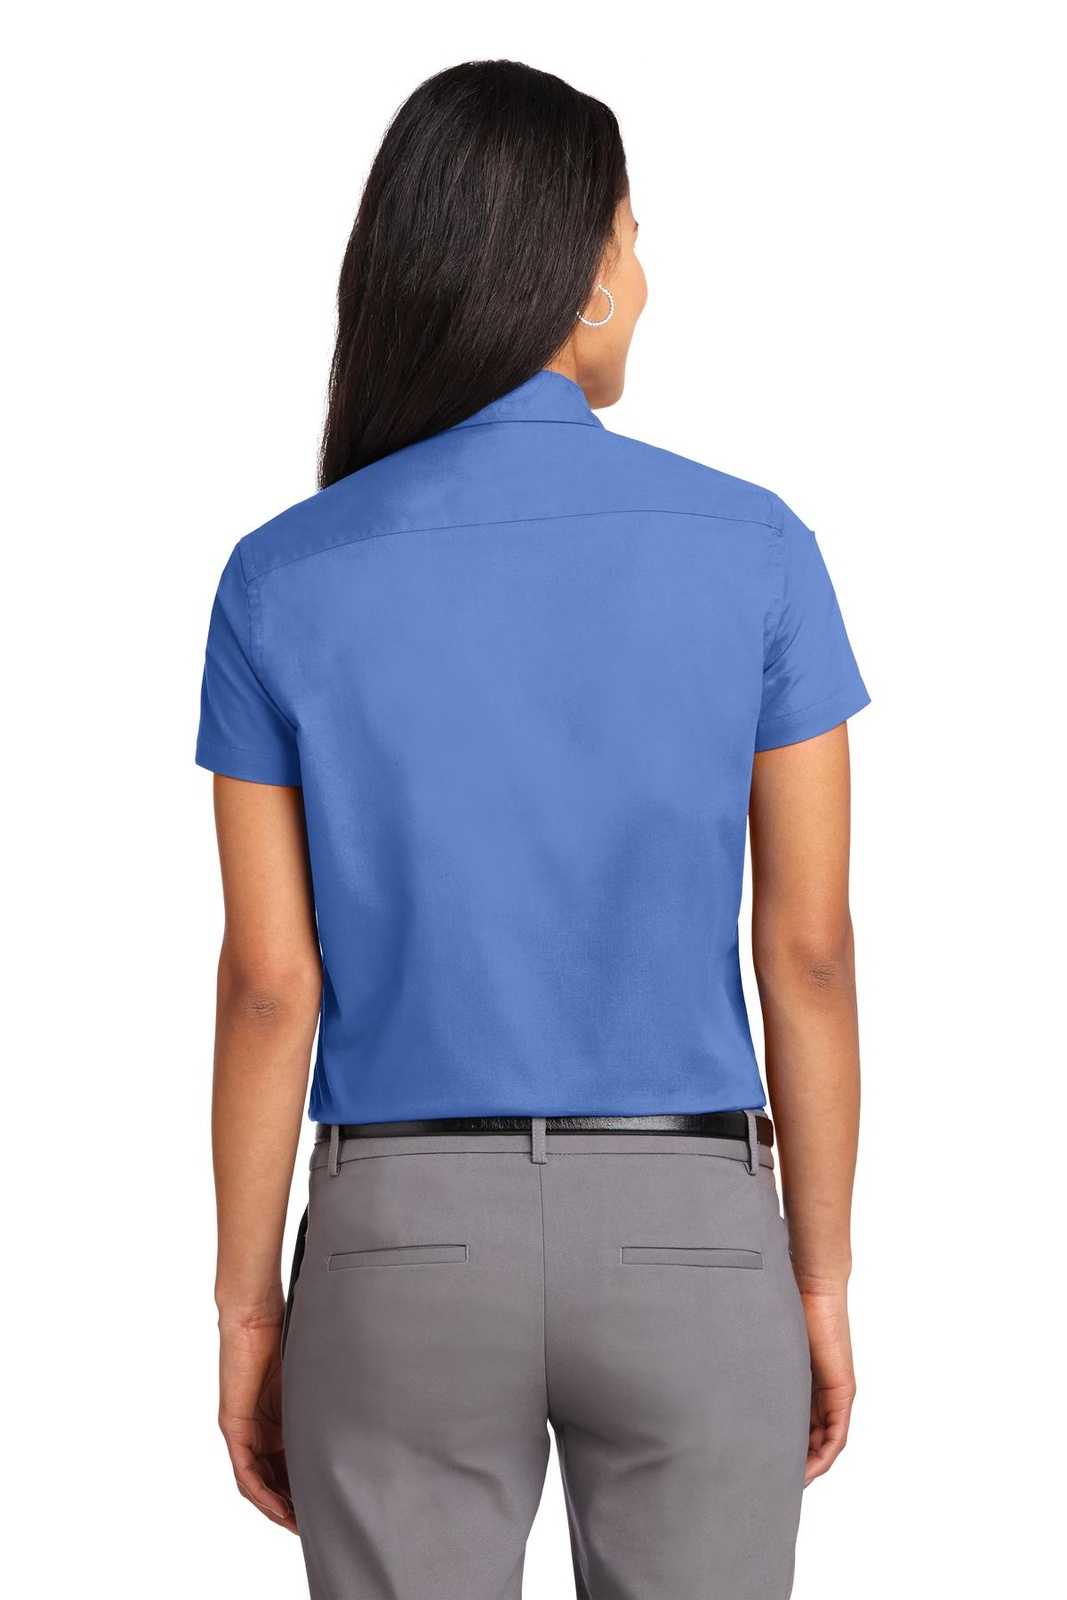 Port Authority L508 Ladies Short Sleeve Easy Care Shirt - Ultramarine Blue - HIT a Double - 1